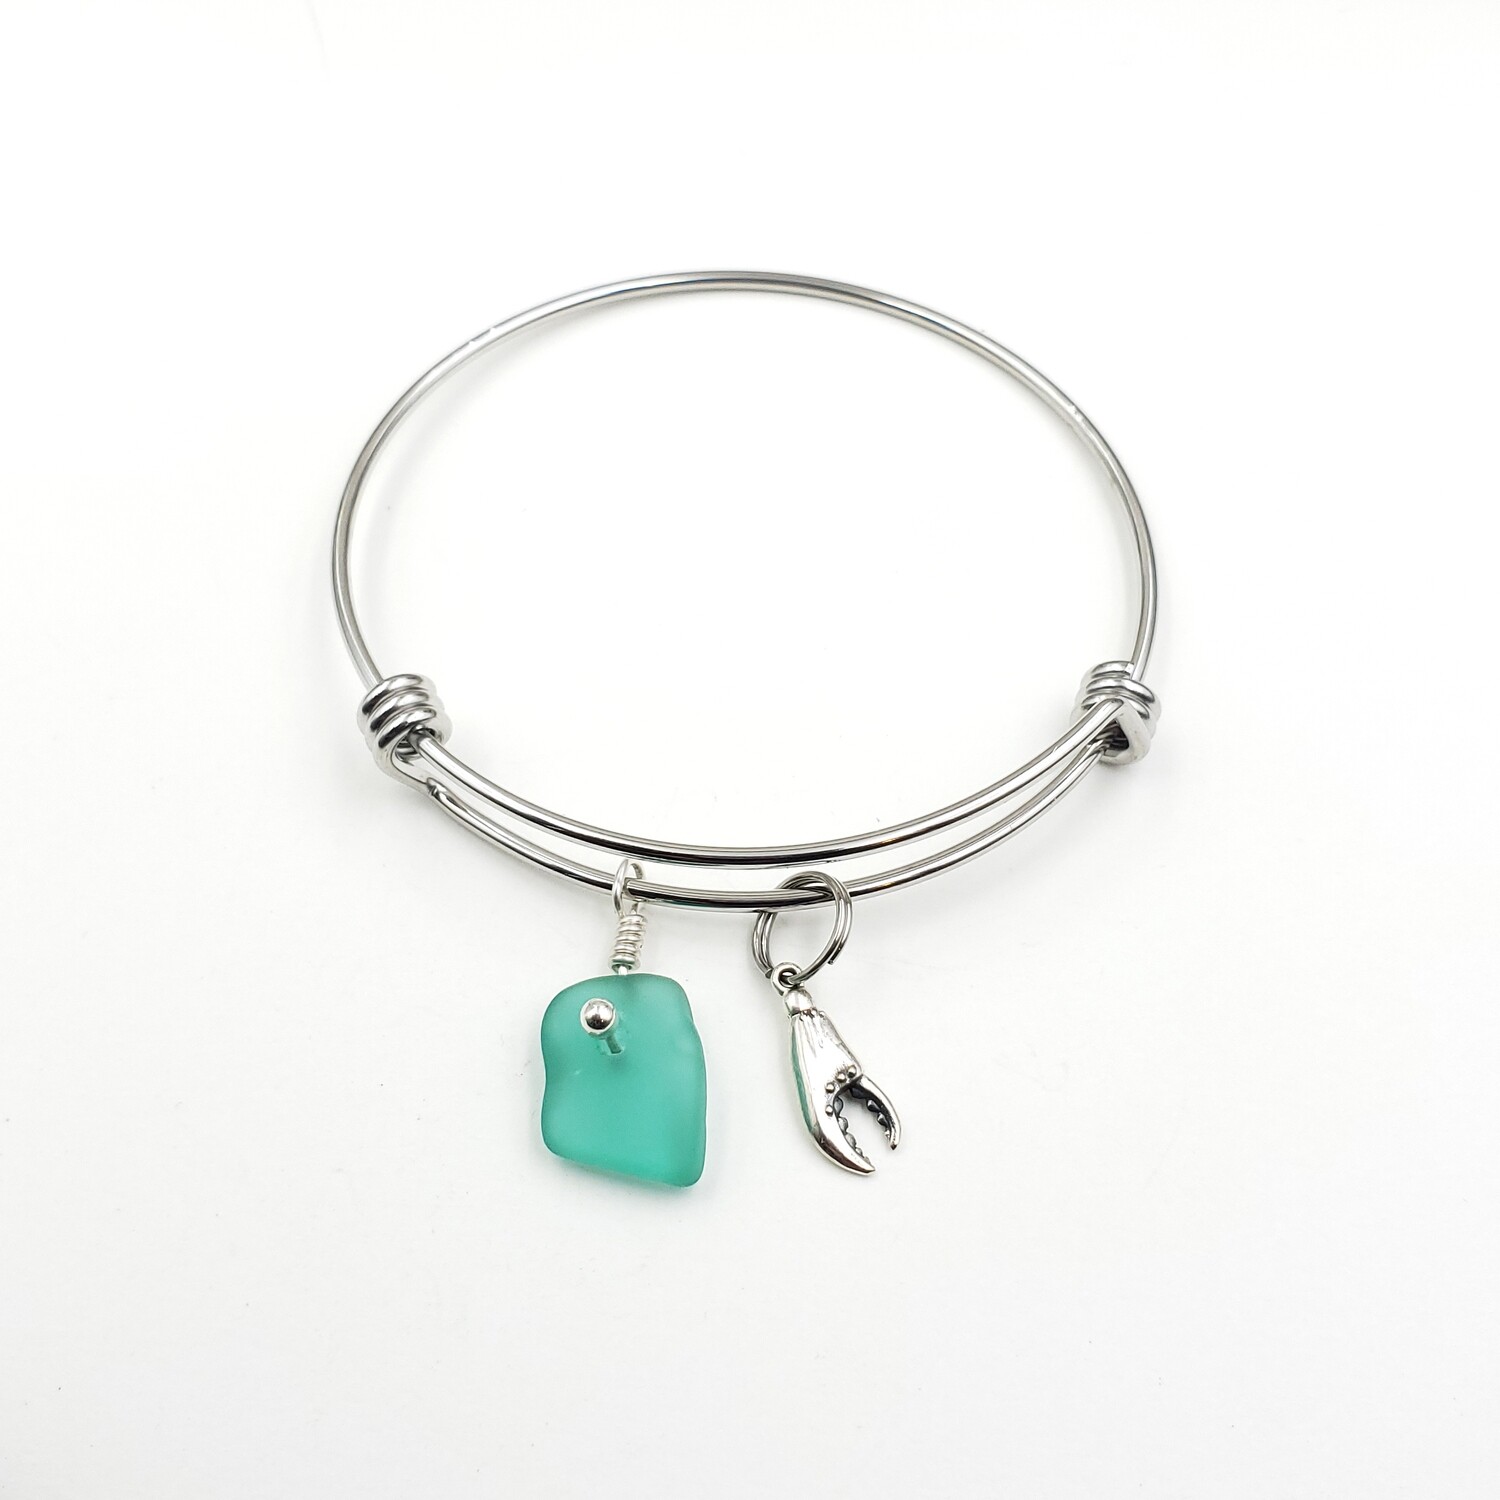 Bangle Bracelet with Crab Claw Charm and Teal Green Maine Sea Glass